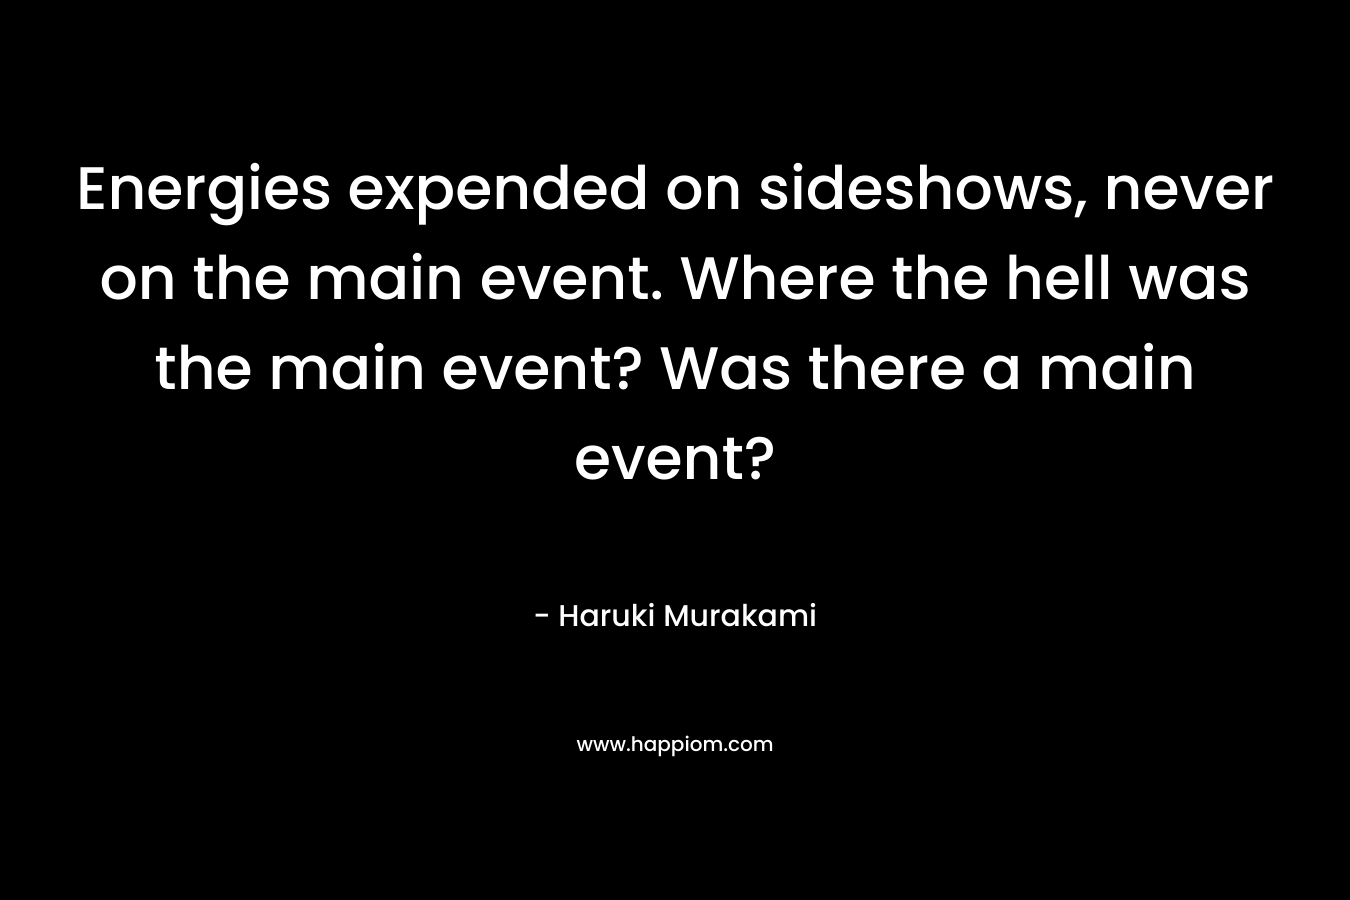 Energies expended on sideshows, never on the main event. Where the hell was the main event? Was there a main event?